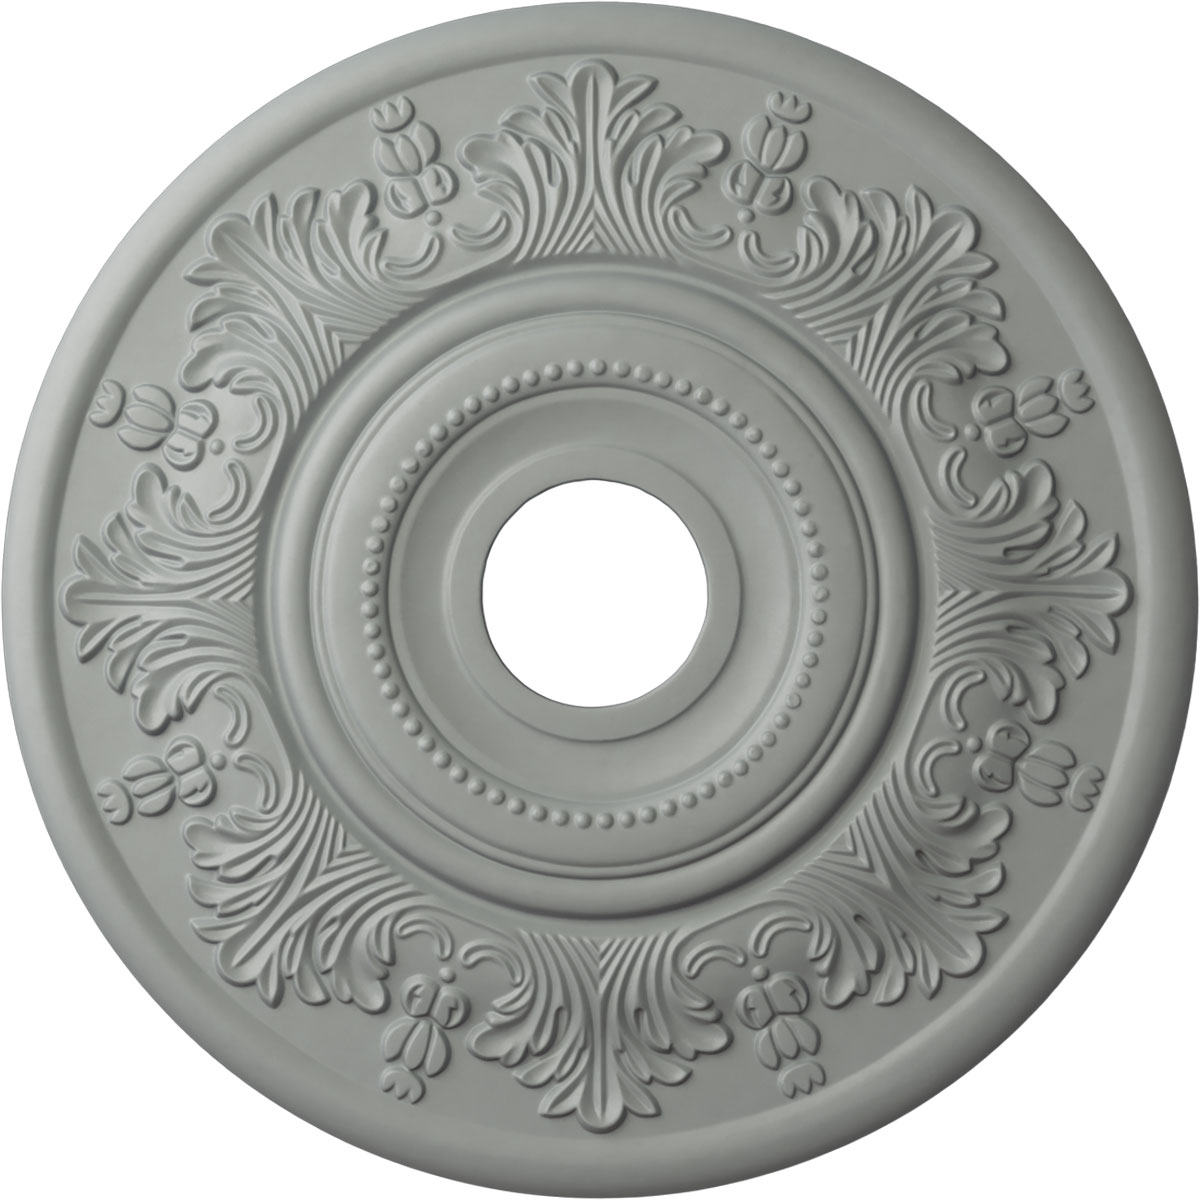 Factory Primed Ekena Millwork CM20BX Biddix Ceiling Medallion Fits Canopies up to 7 1/2 20 7/8OD x 1 1/4P 